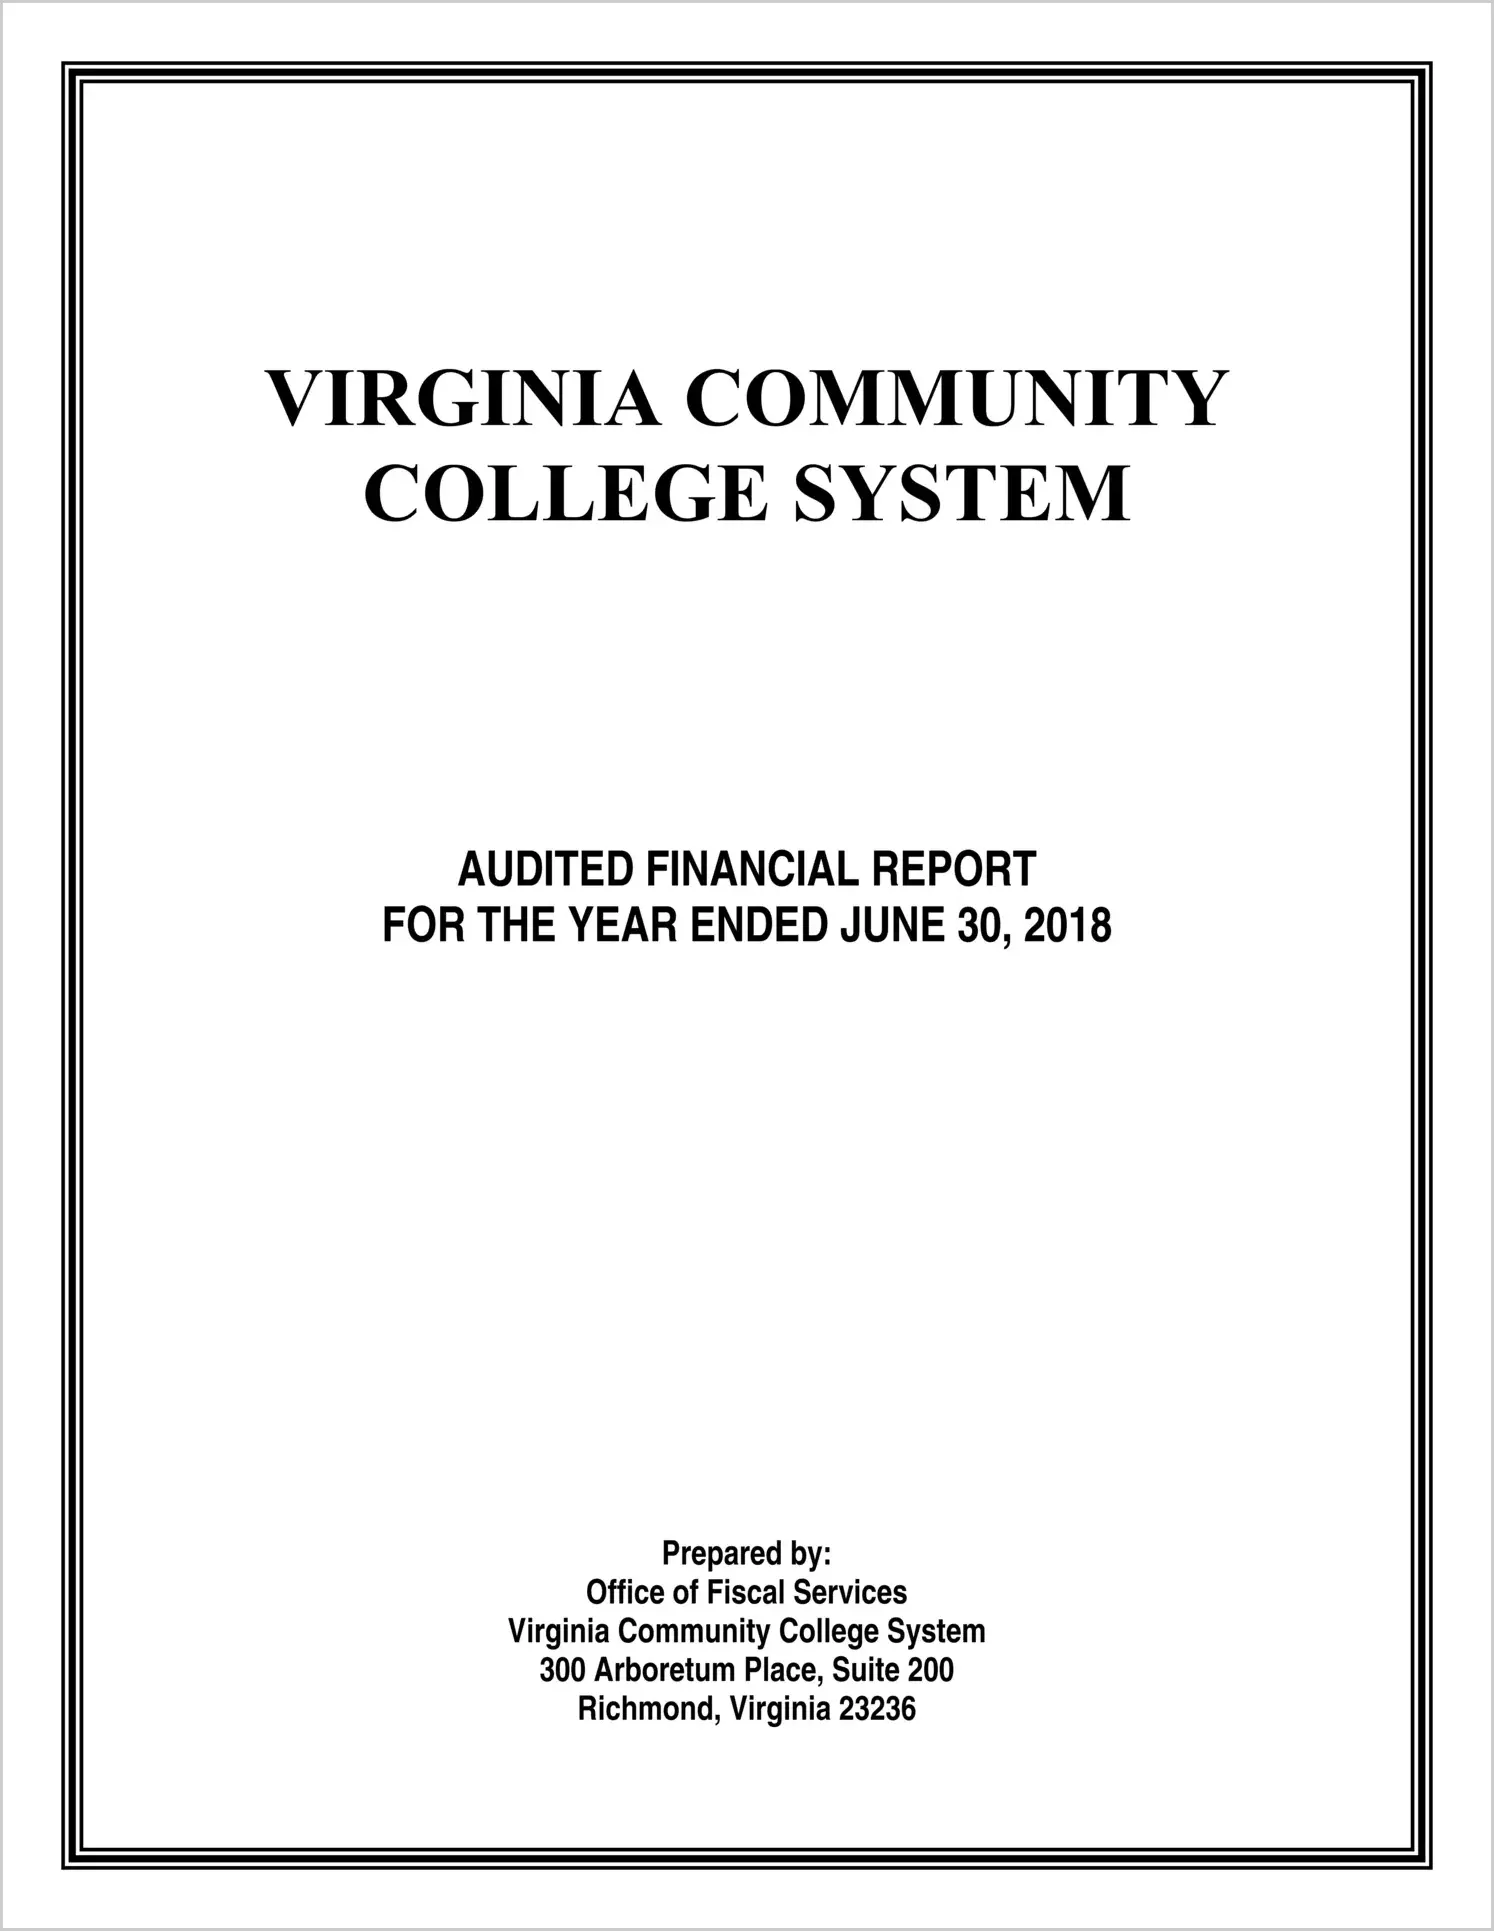 Virginia Community College System Financial Statements  for the year ended June 30, 2018